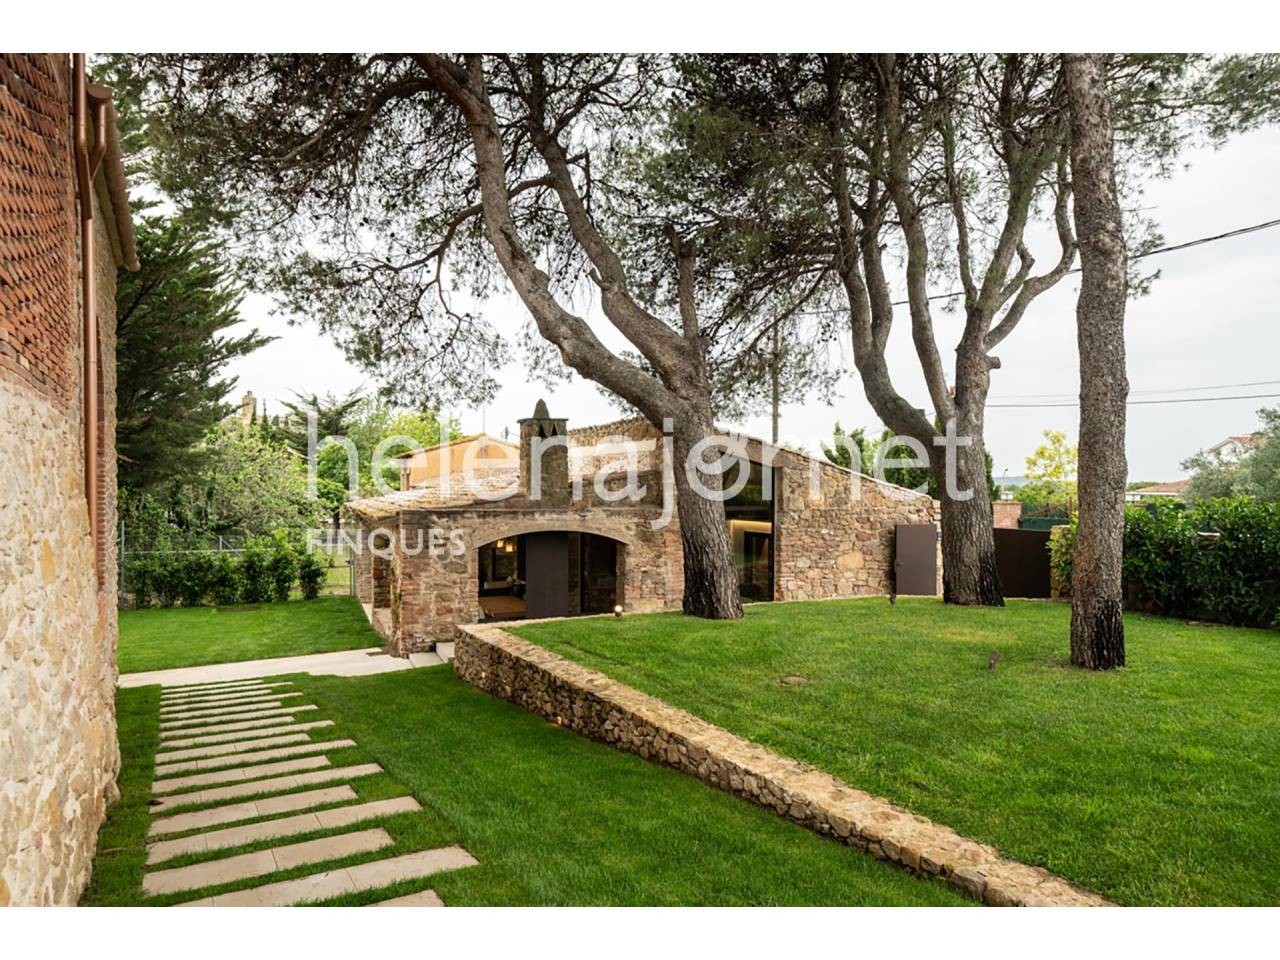 Spectacular stone house with large land lot in Fontclara - 2343